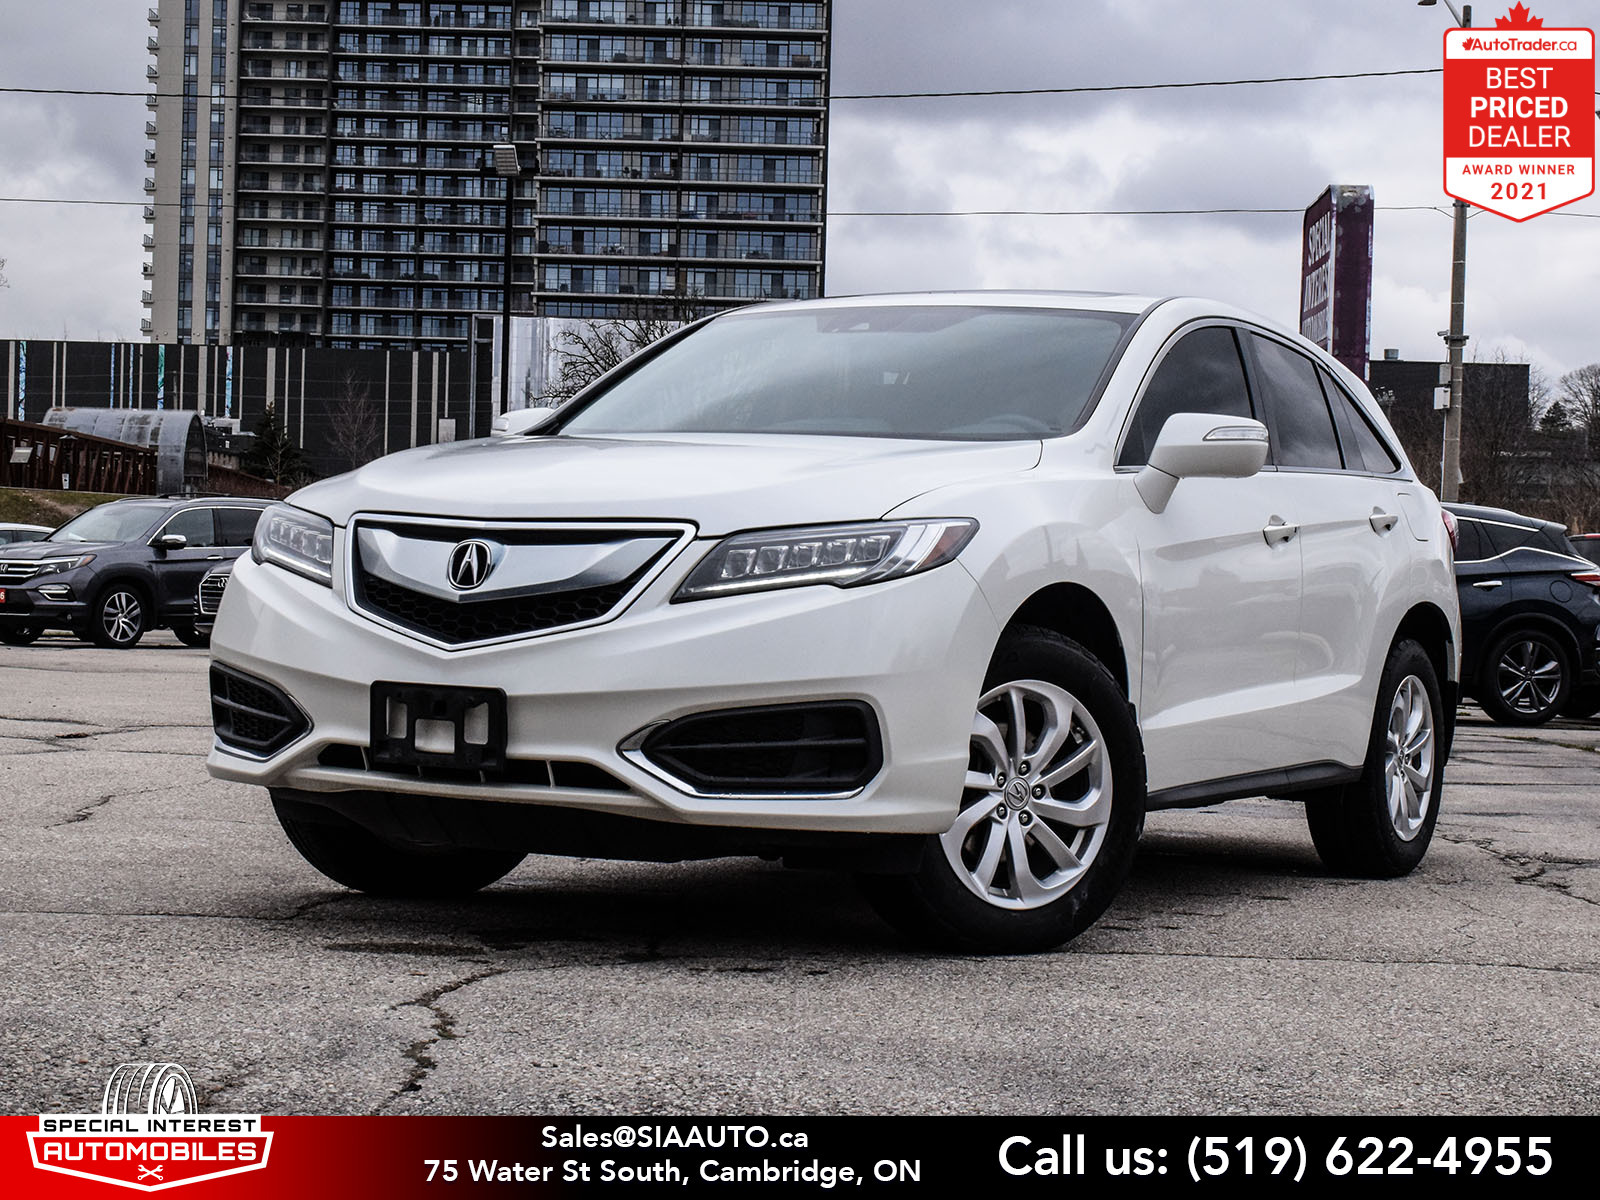 2017 Acura RDX AWD Tech Pkg * Accident Free * Certified * Sunroof